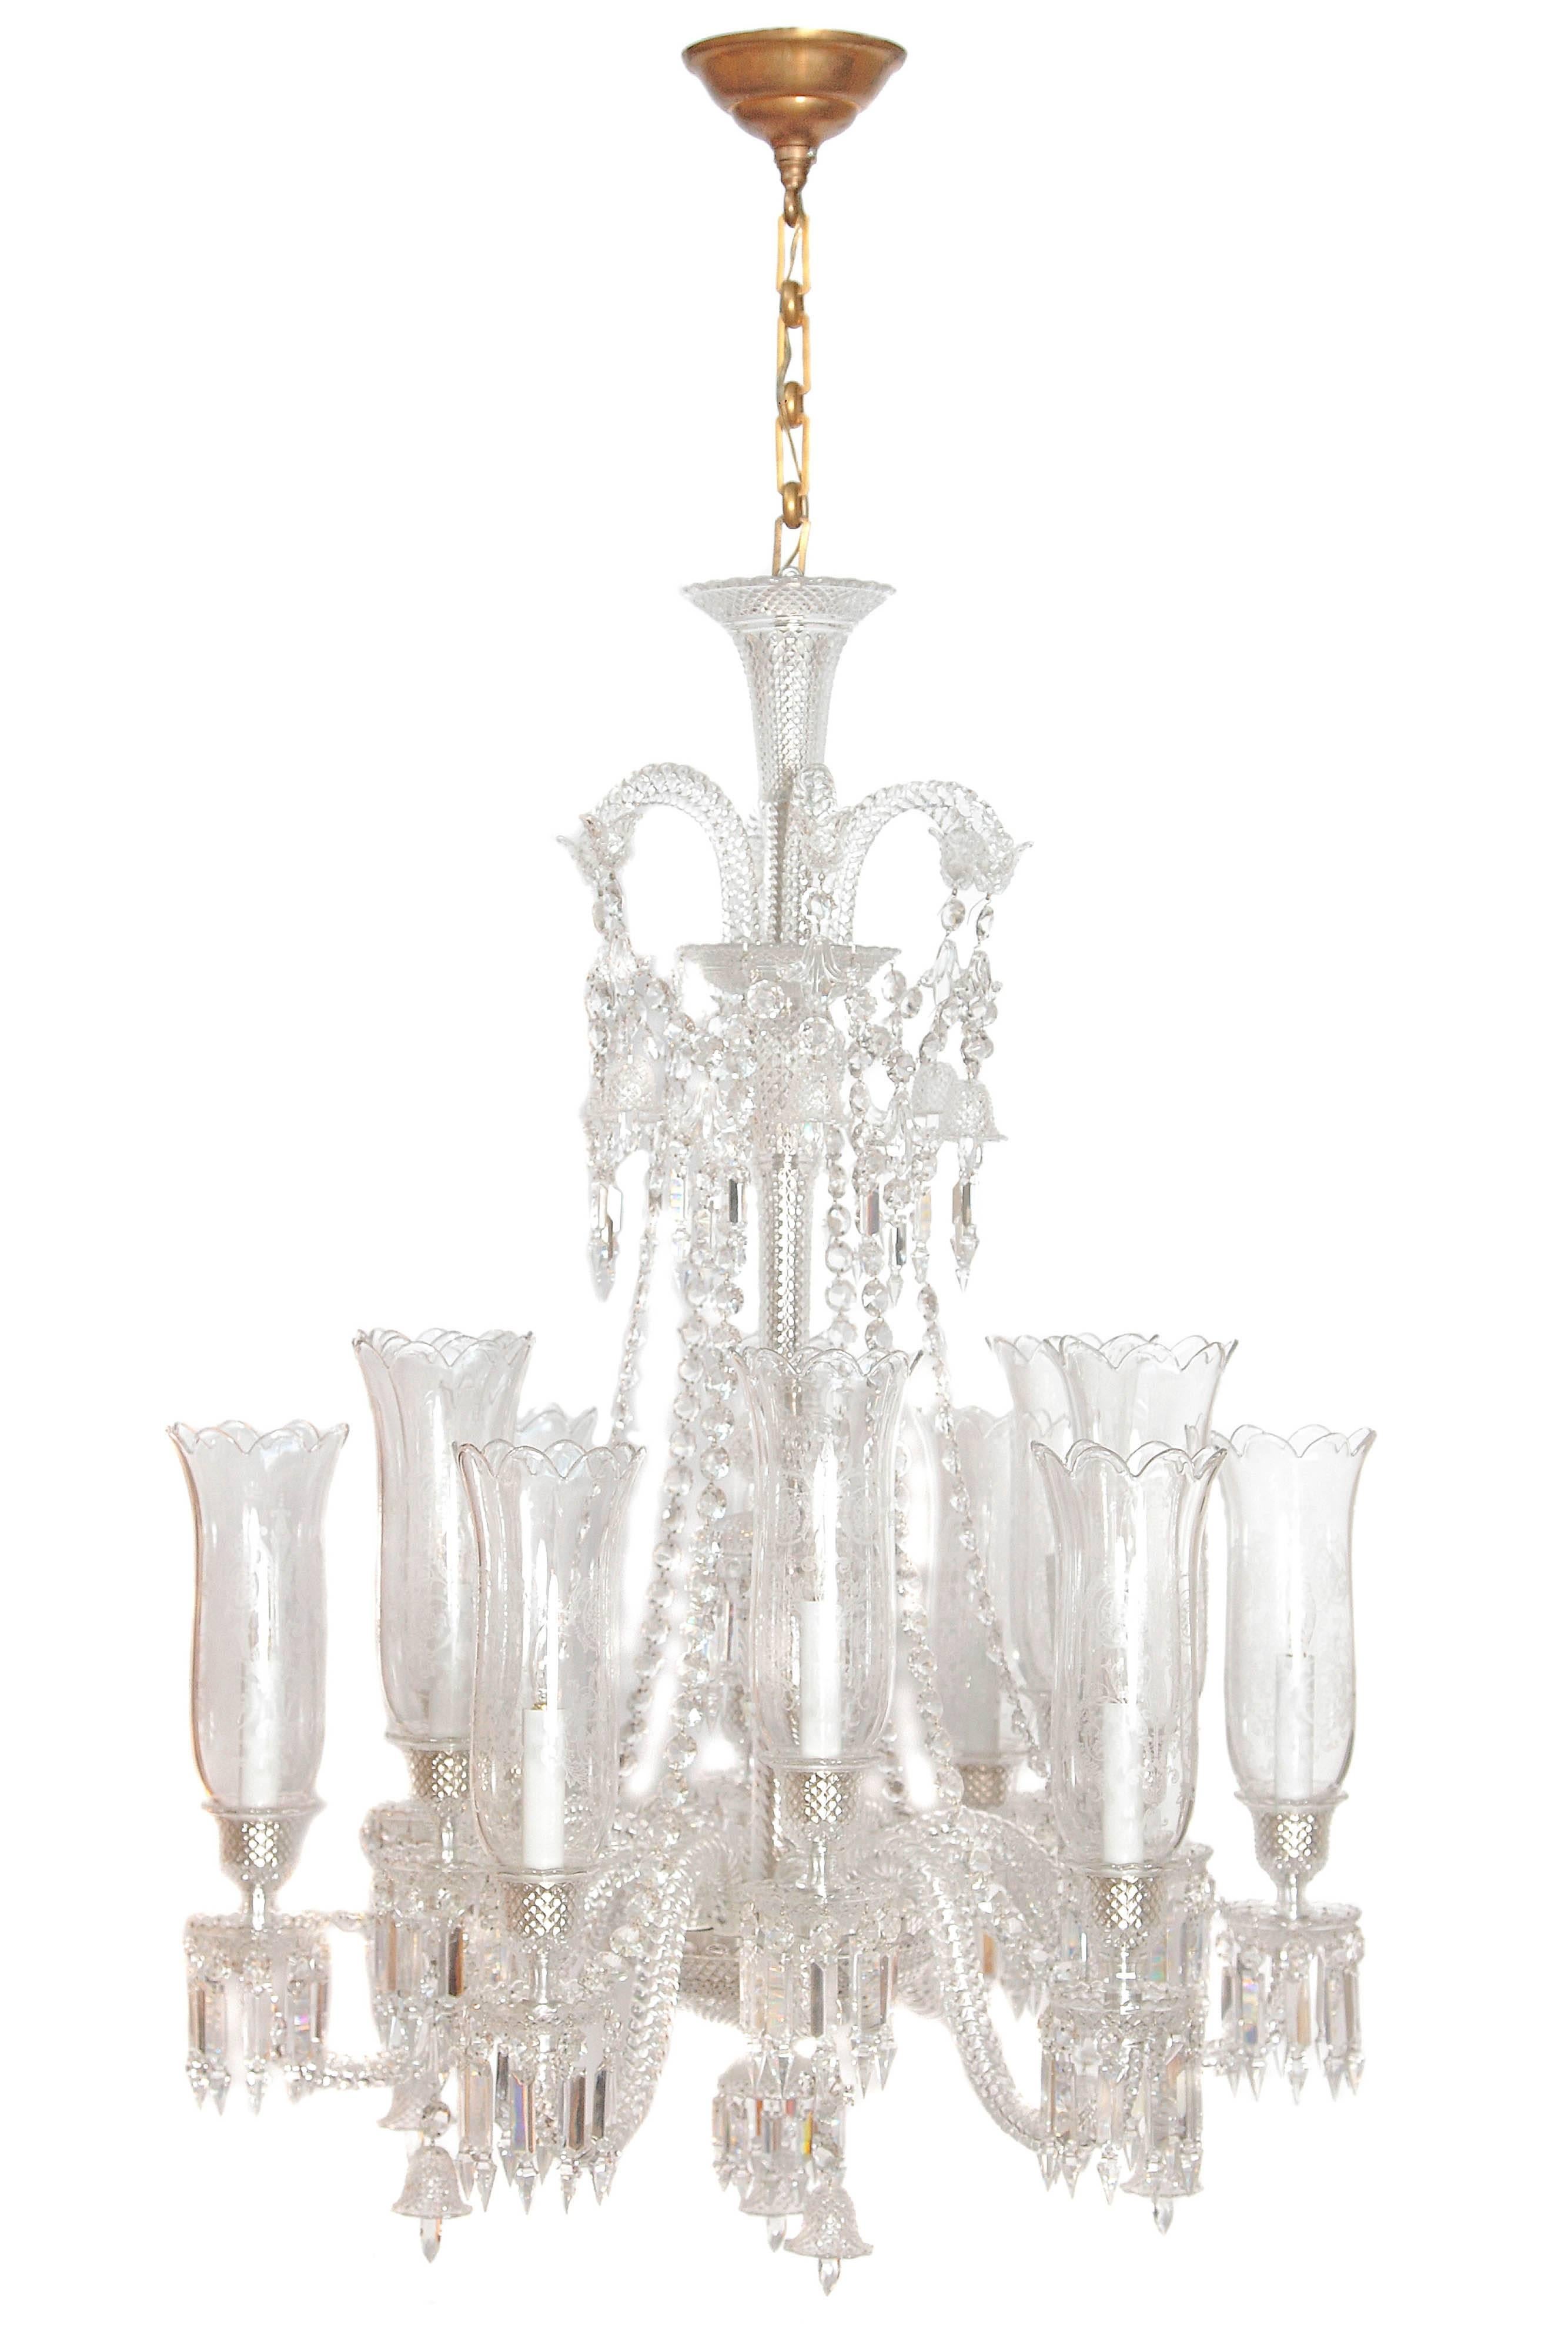 From Baccarat's Zenith collection by French designer Philippe Starck, the Zenith long twelve-light chandelier (the iconic Baccarat chandelier par excellence), handcrafted full-lead crystal made in France, the fixture has a central column of cut